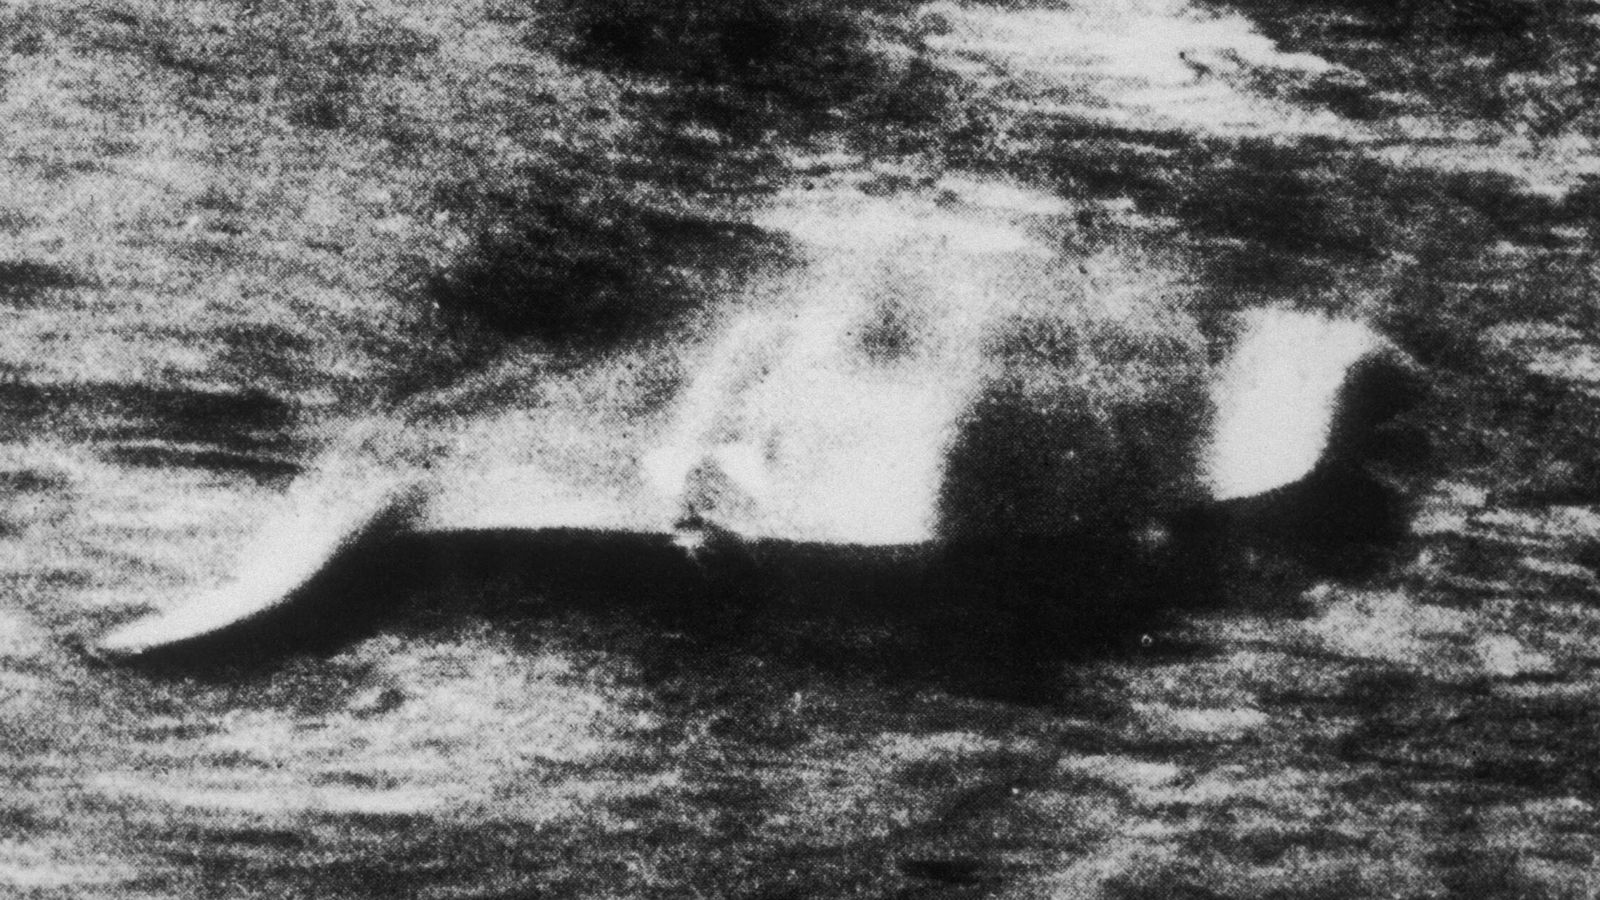 The Loch Ness monster and the story behind the mysterious water beast theories - 90 years since first photo